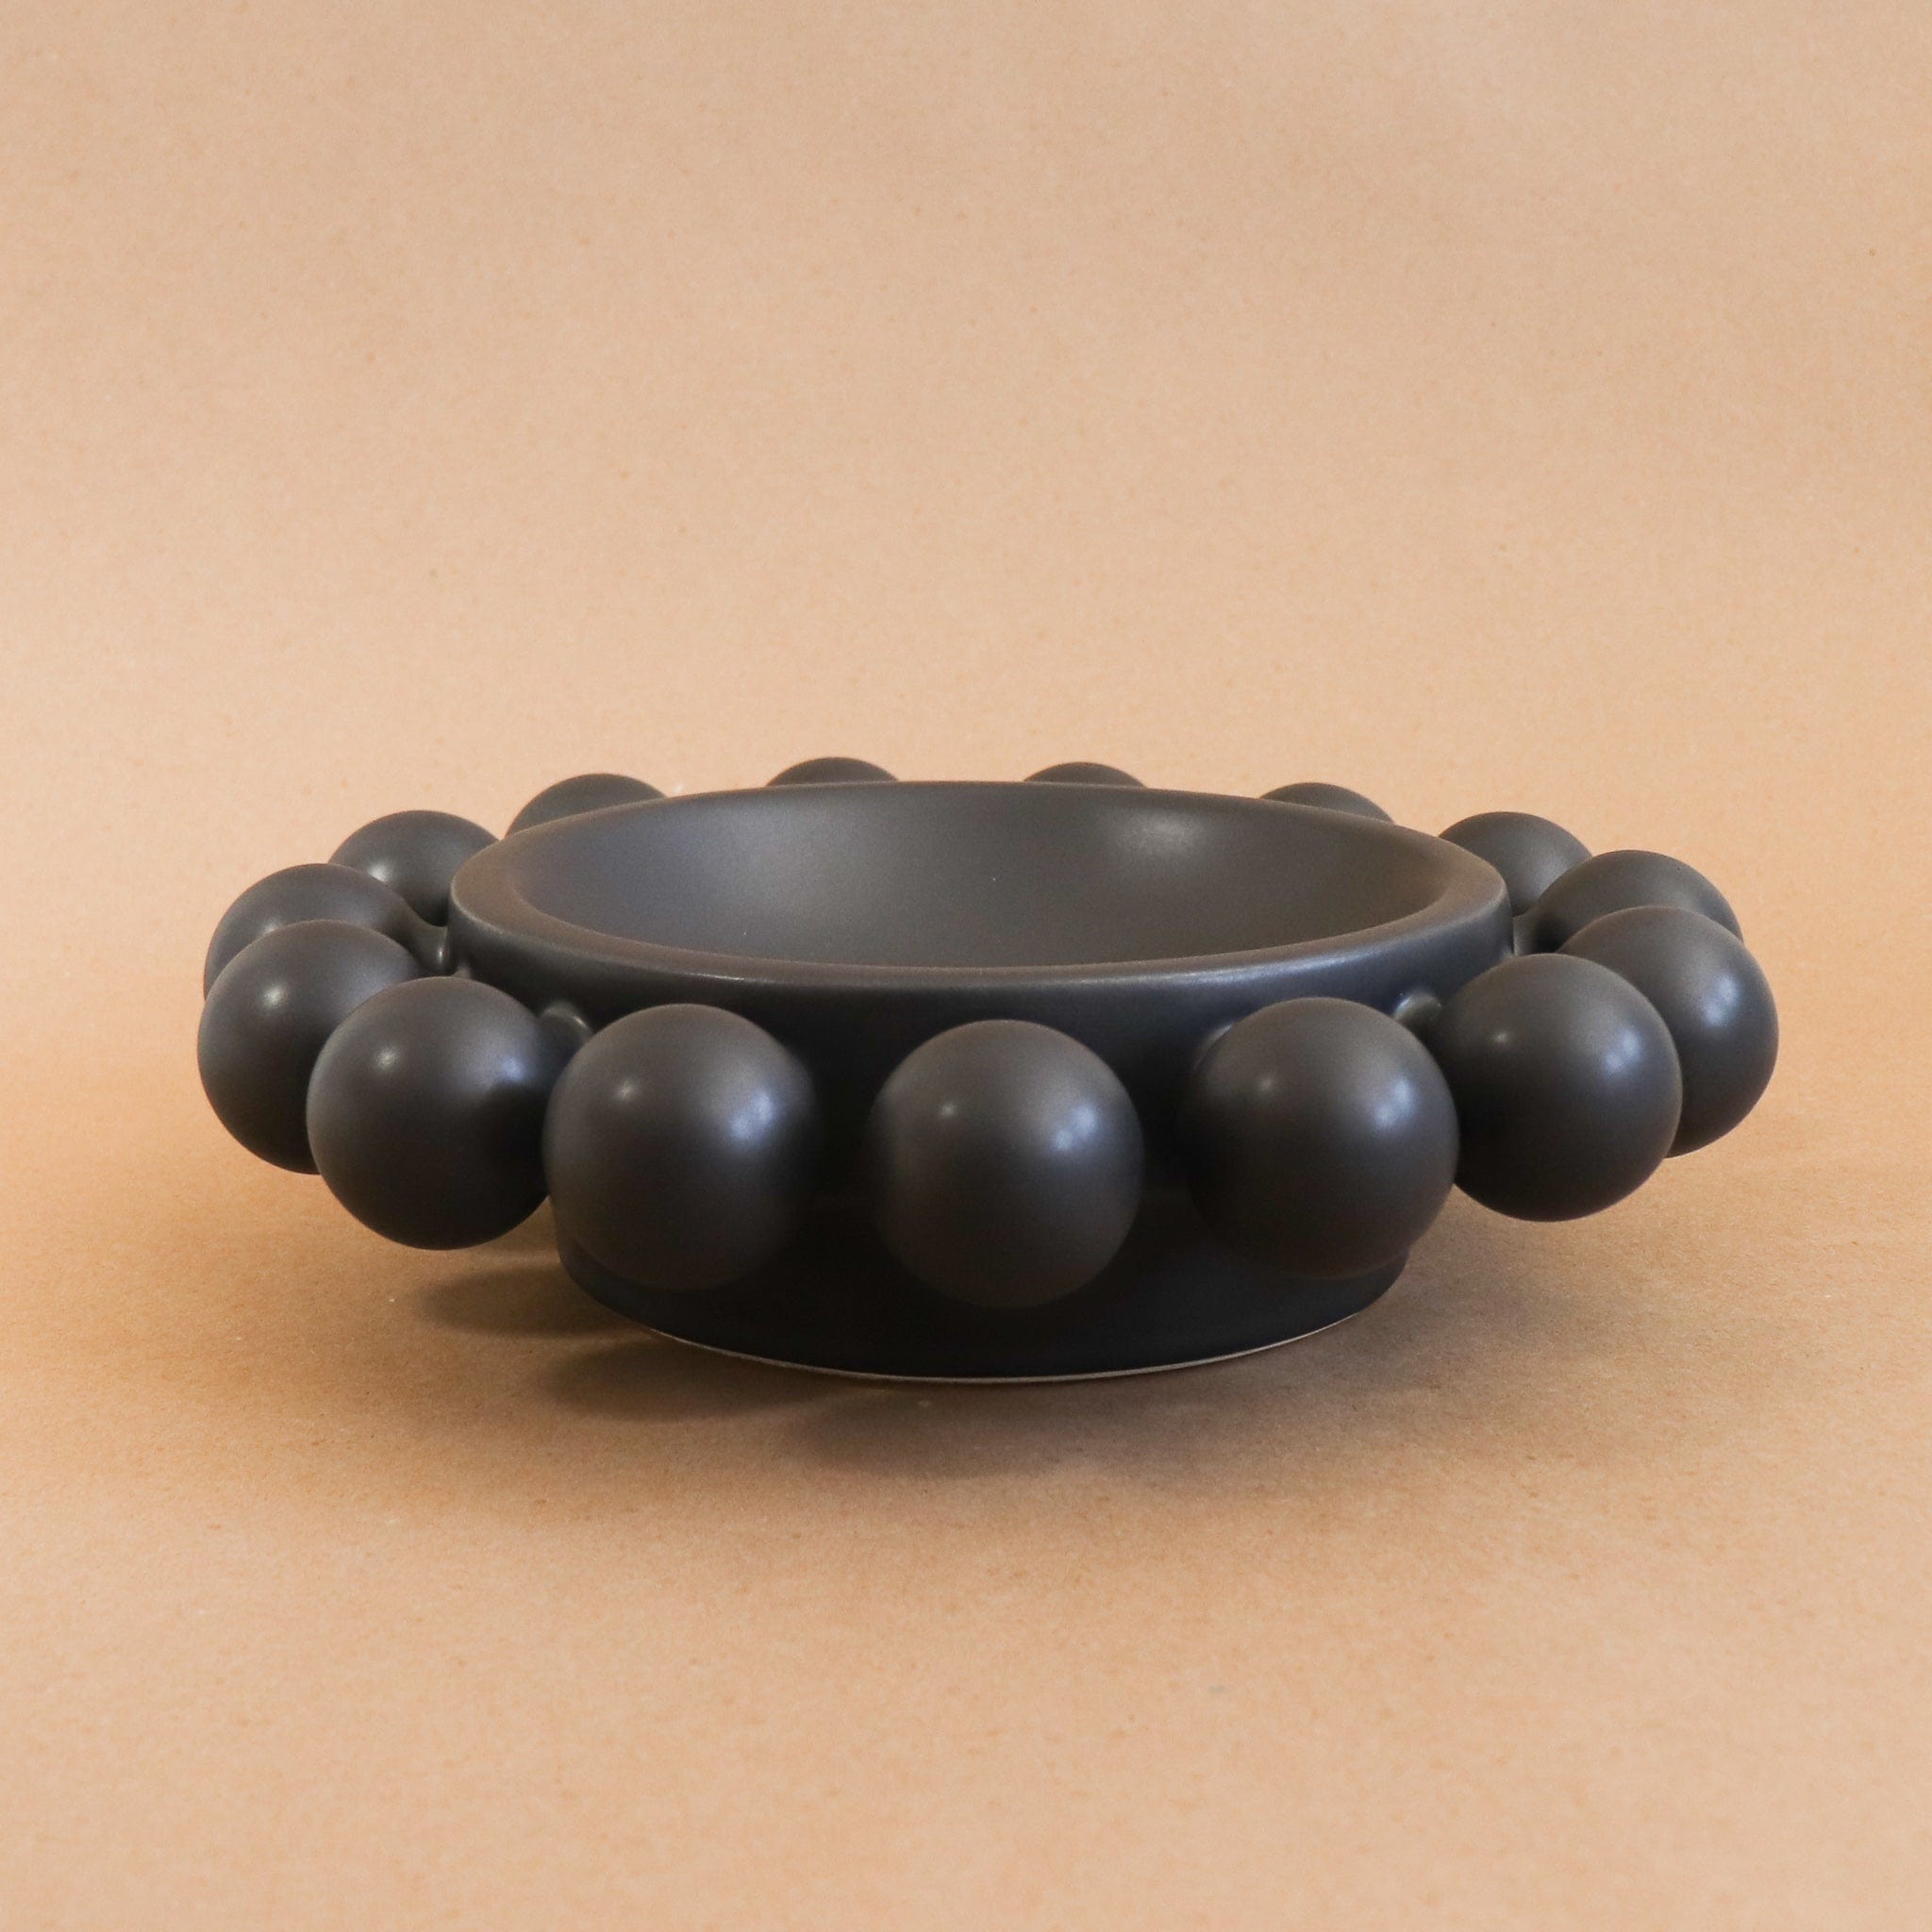 KleinReid Ceramics Halo Bowl | Available for Pre-Order | Local Pickup Only